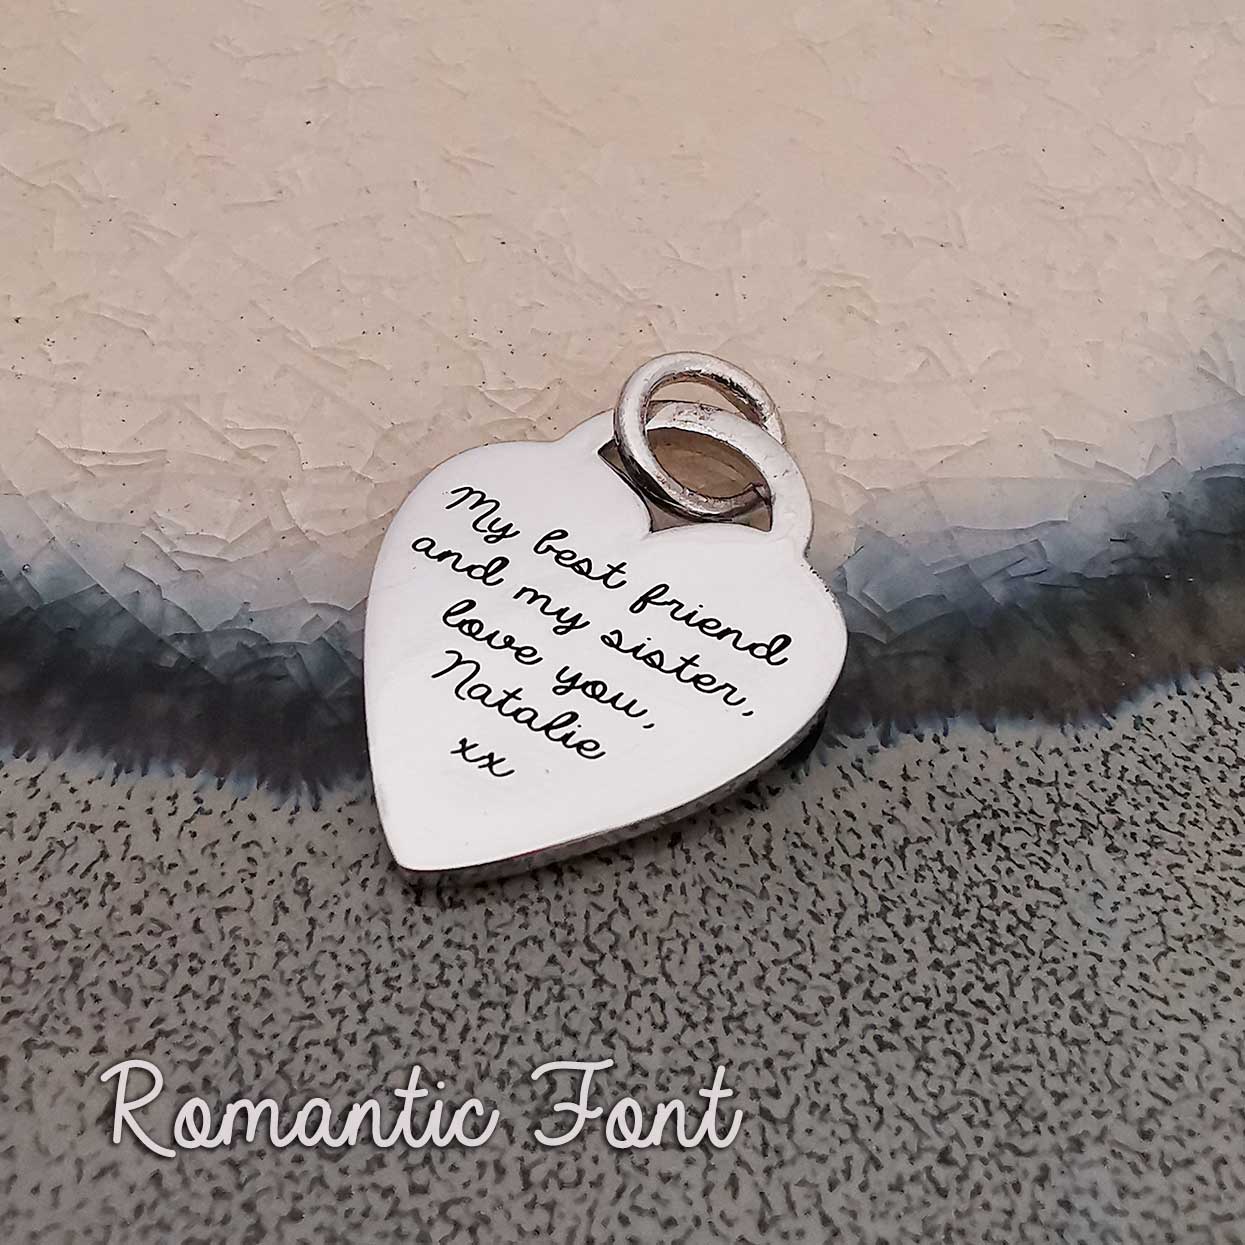 heart tag best friend tiffany style large charm engraved made in UK real sterling silver